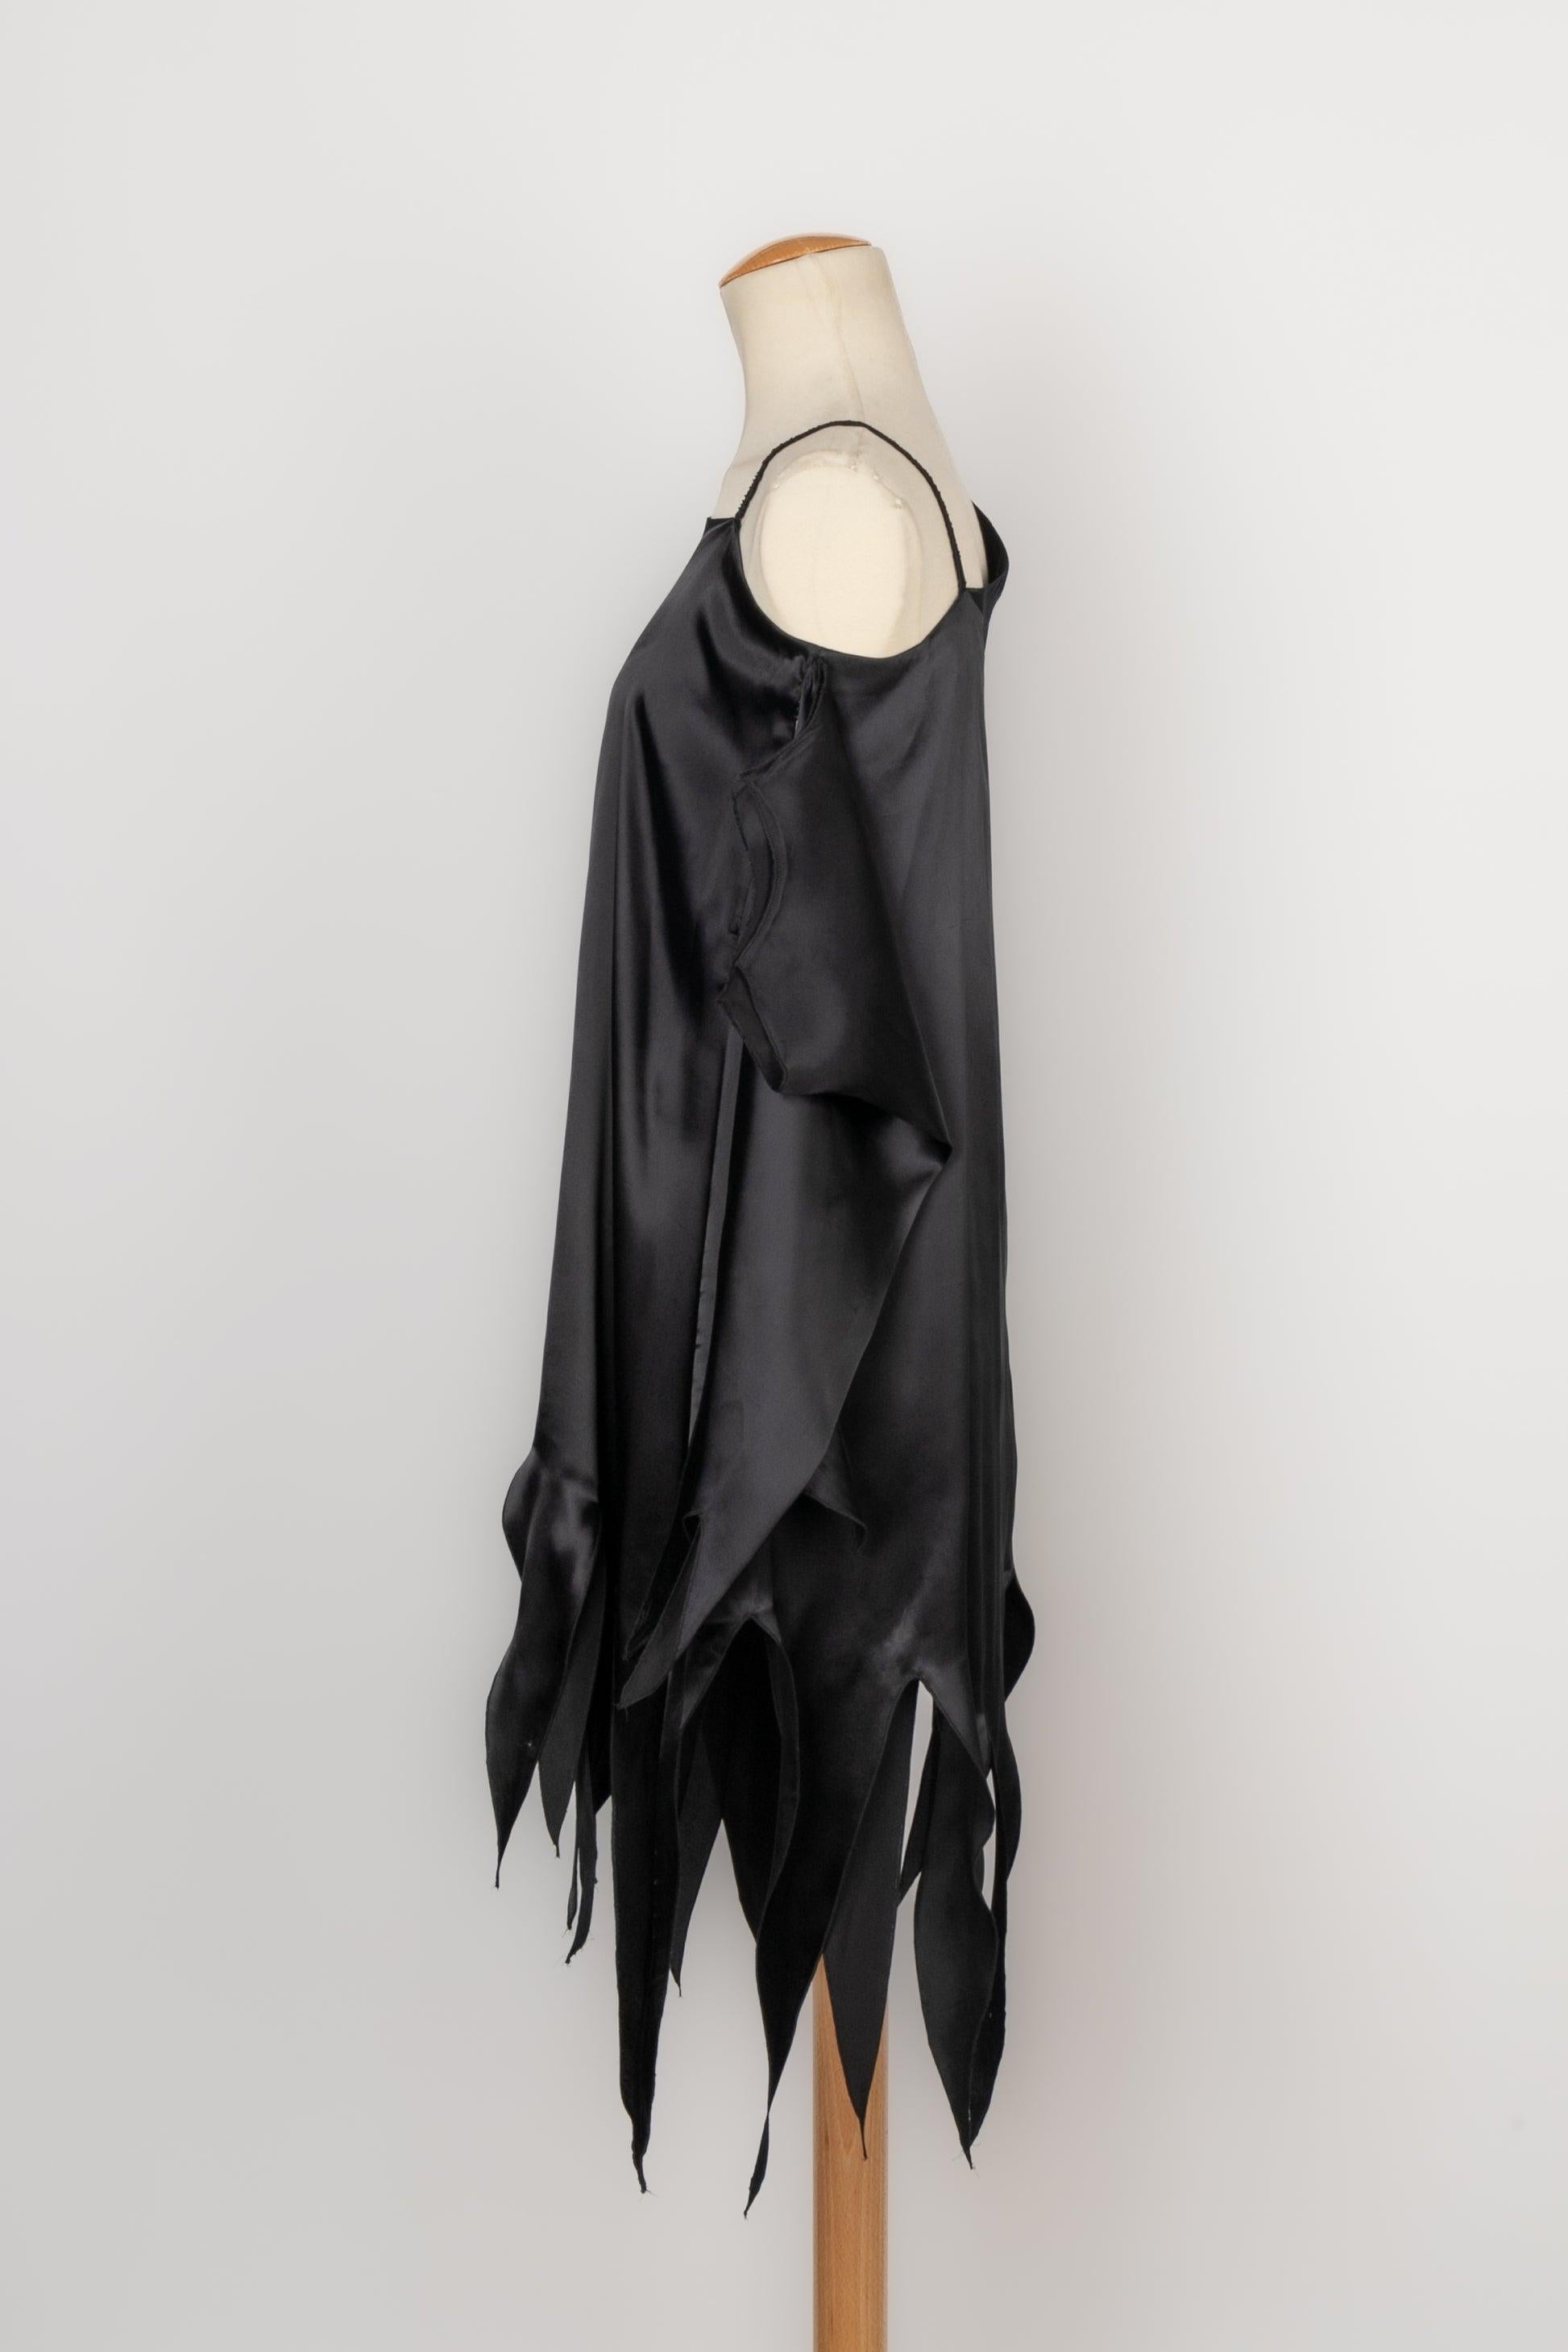 Women's Givenchy Asymmetrical Dress in Black Satin For Sale